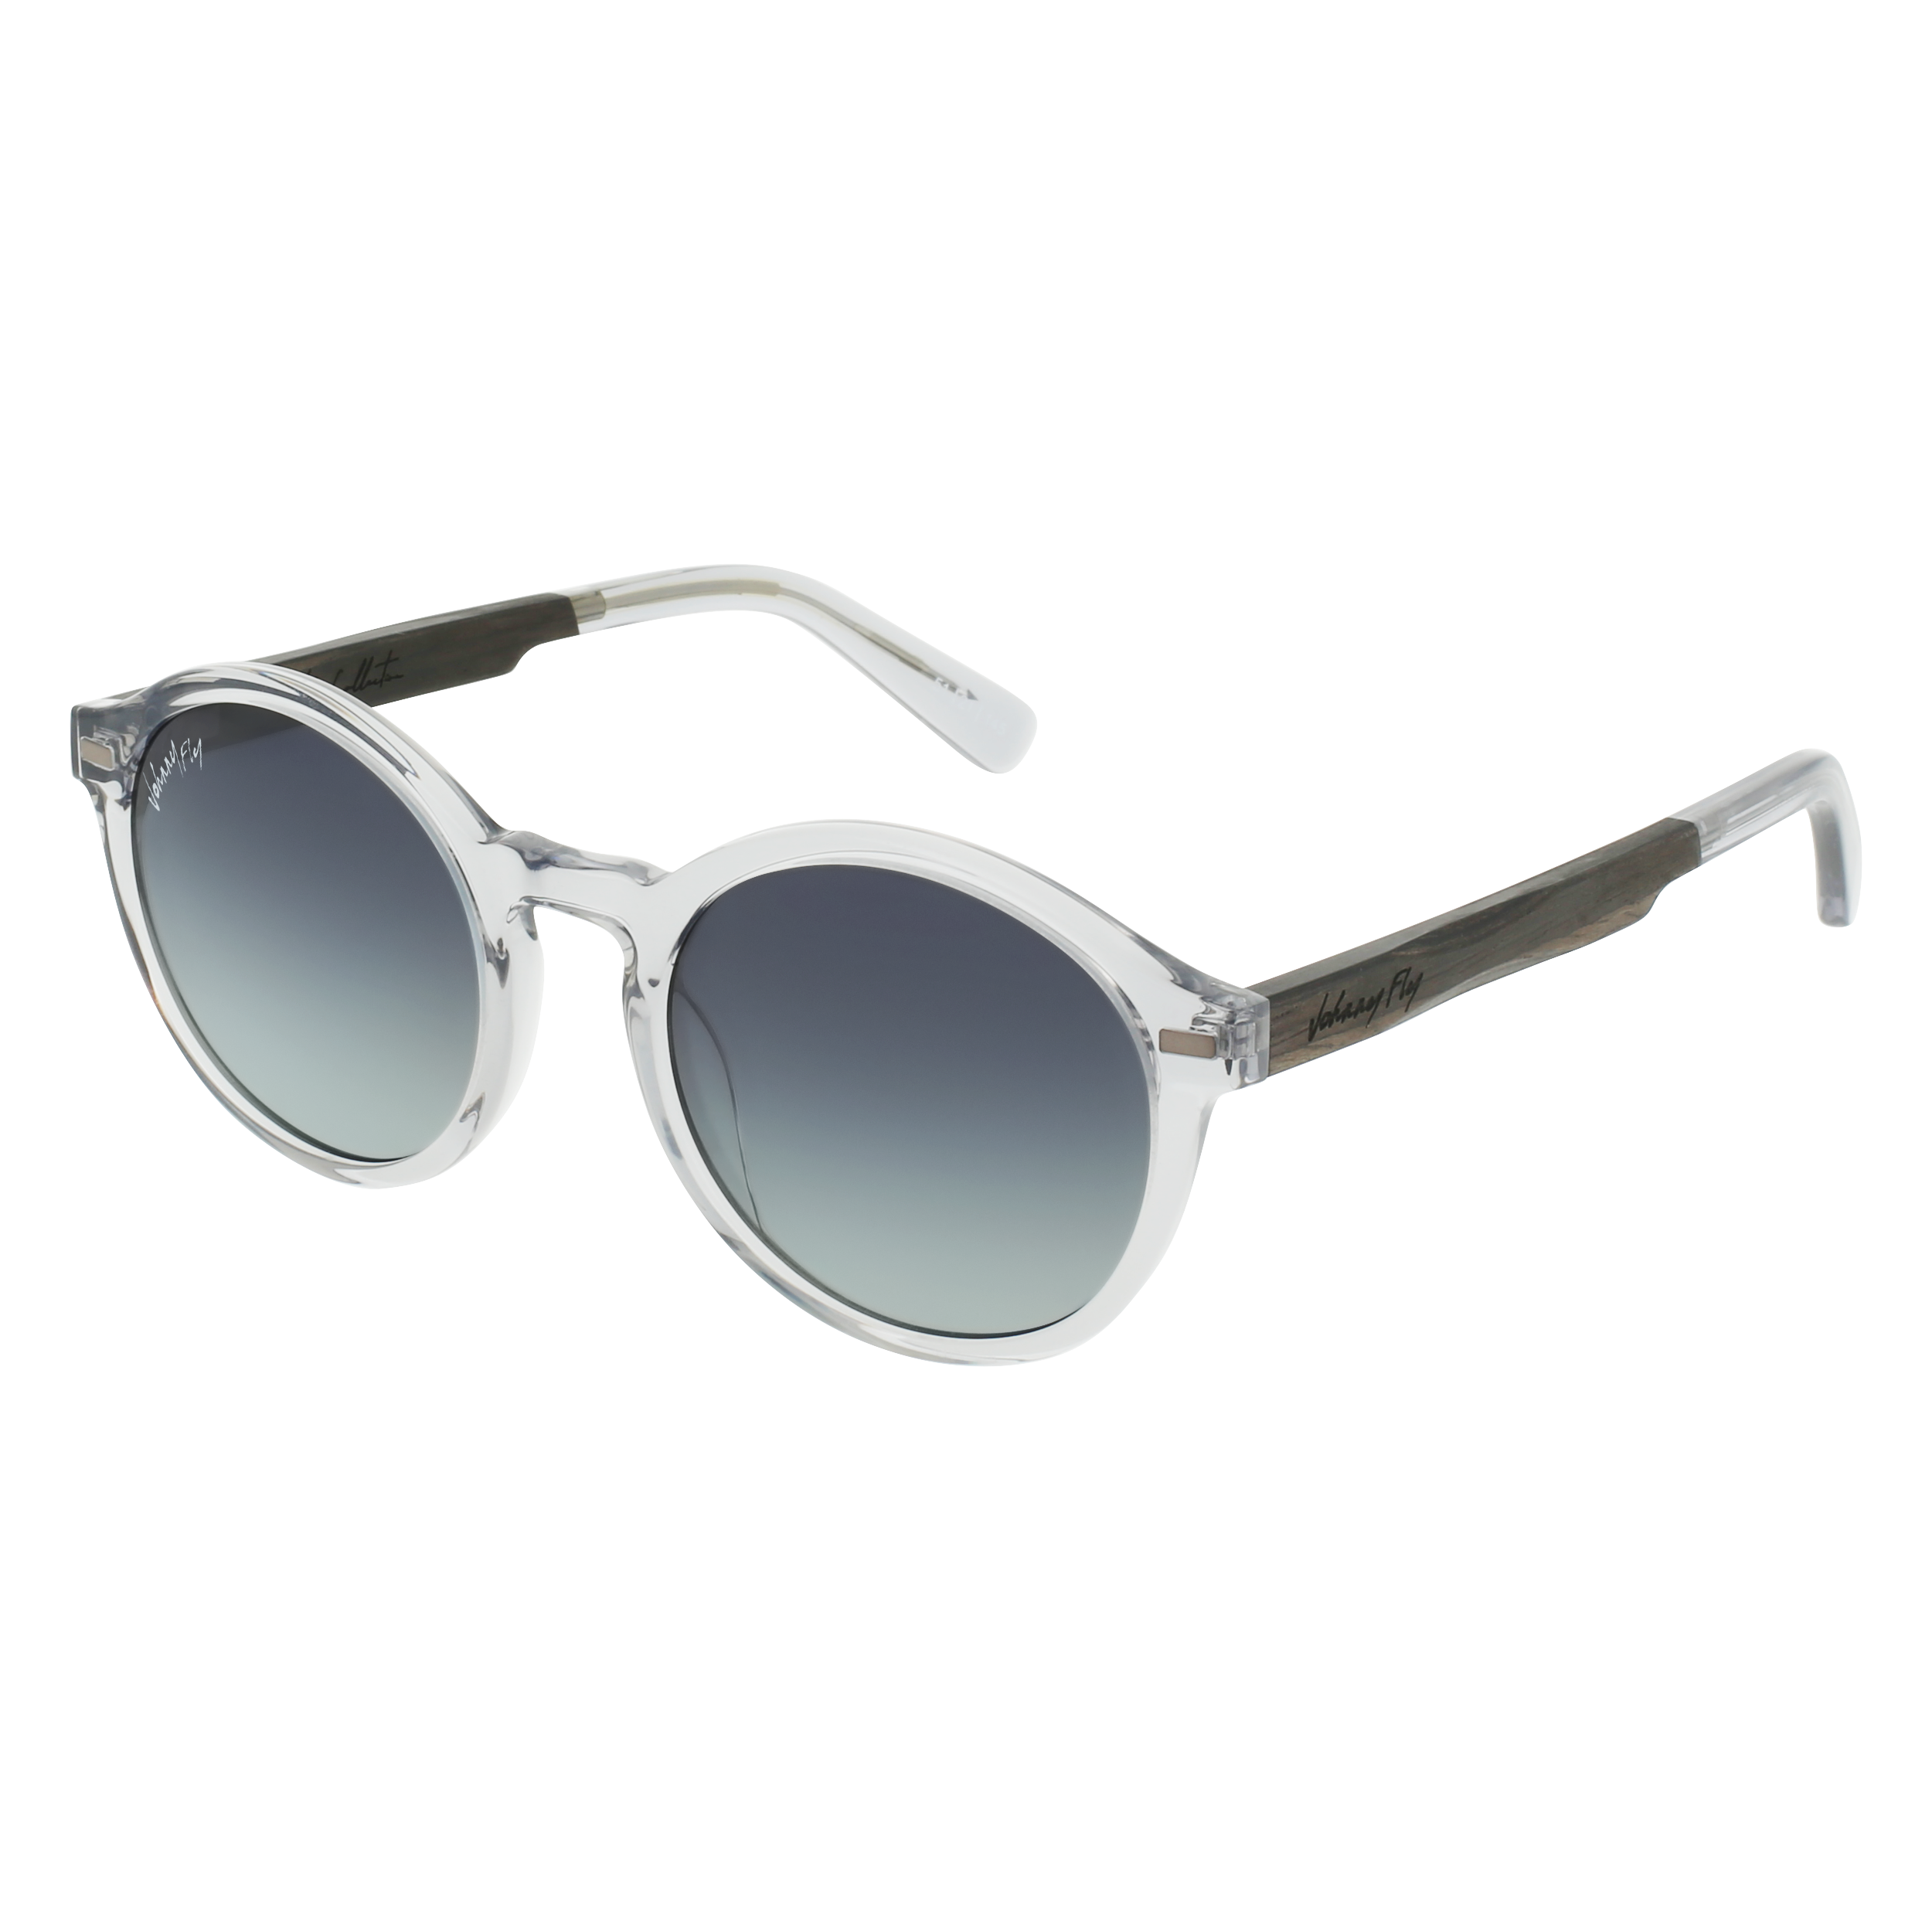 UFO Sunglasses Frame - Tinted Crystal- Johnny Fly | UFO-TCRY-POL-SMK-BWAL | | 